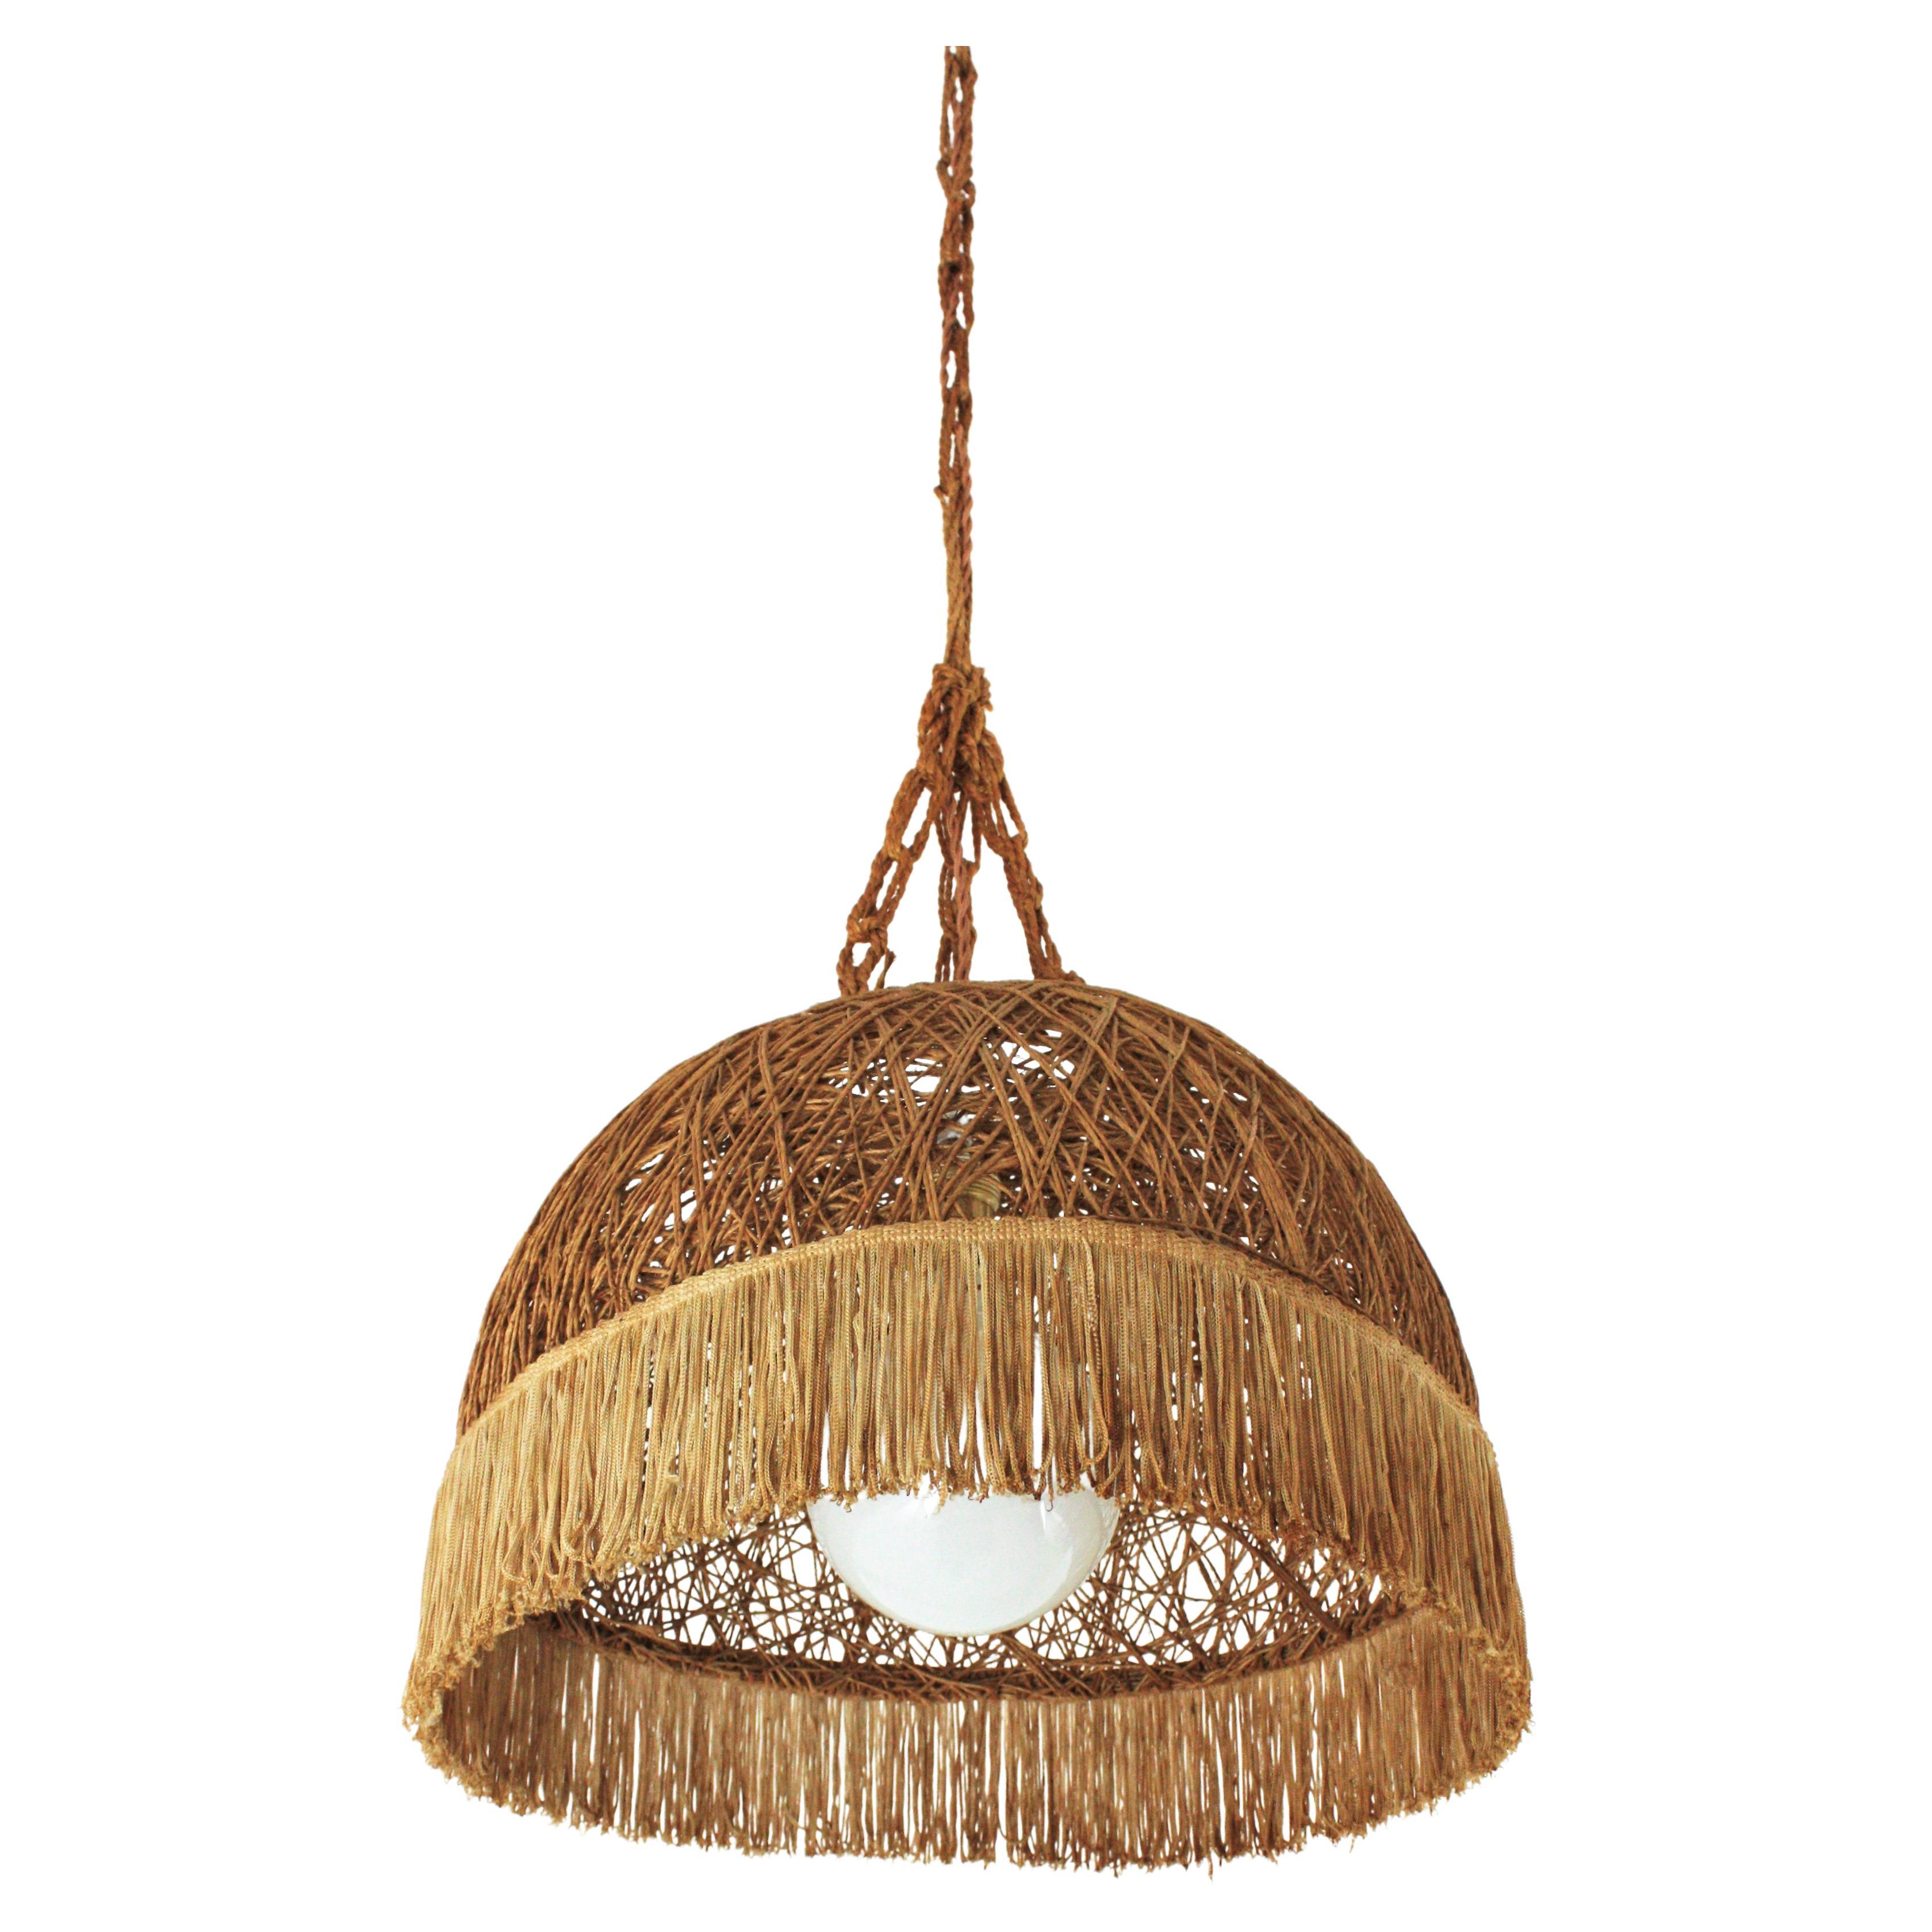 Spanish Rope Hand Woven Pendant Lamp / Suspension with Fringe